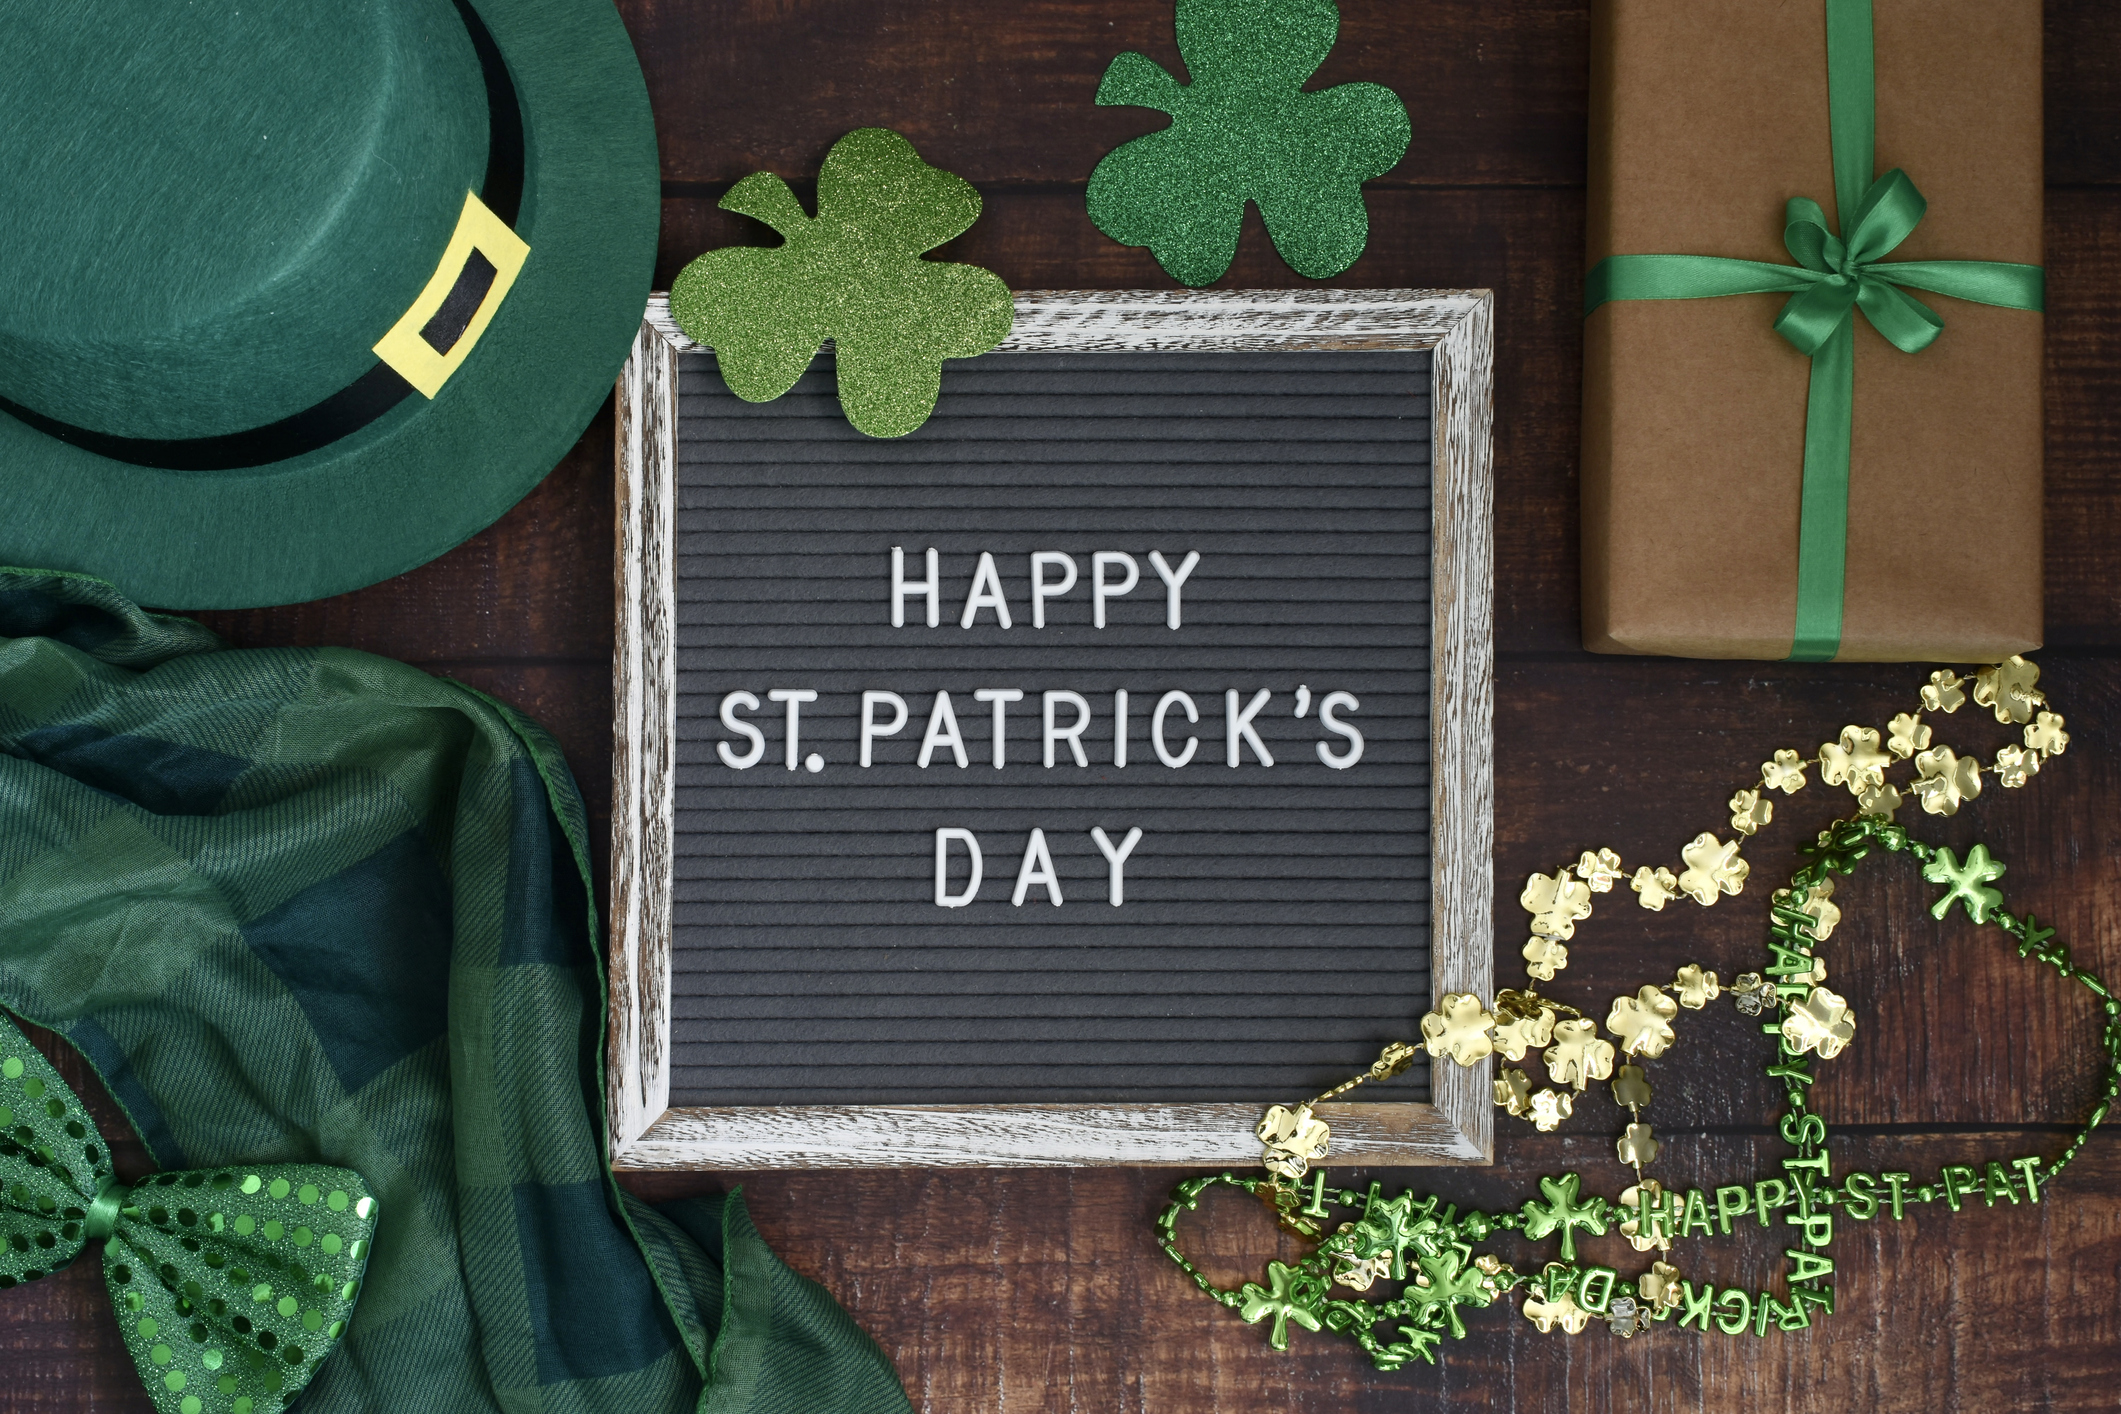 Happy St Patrick’s Day background decorations